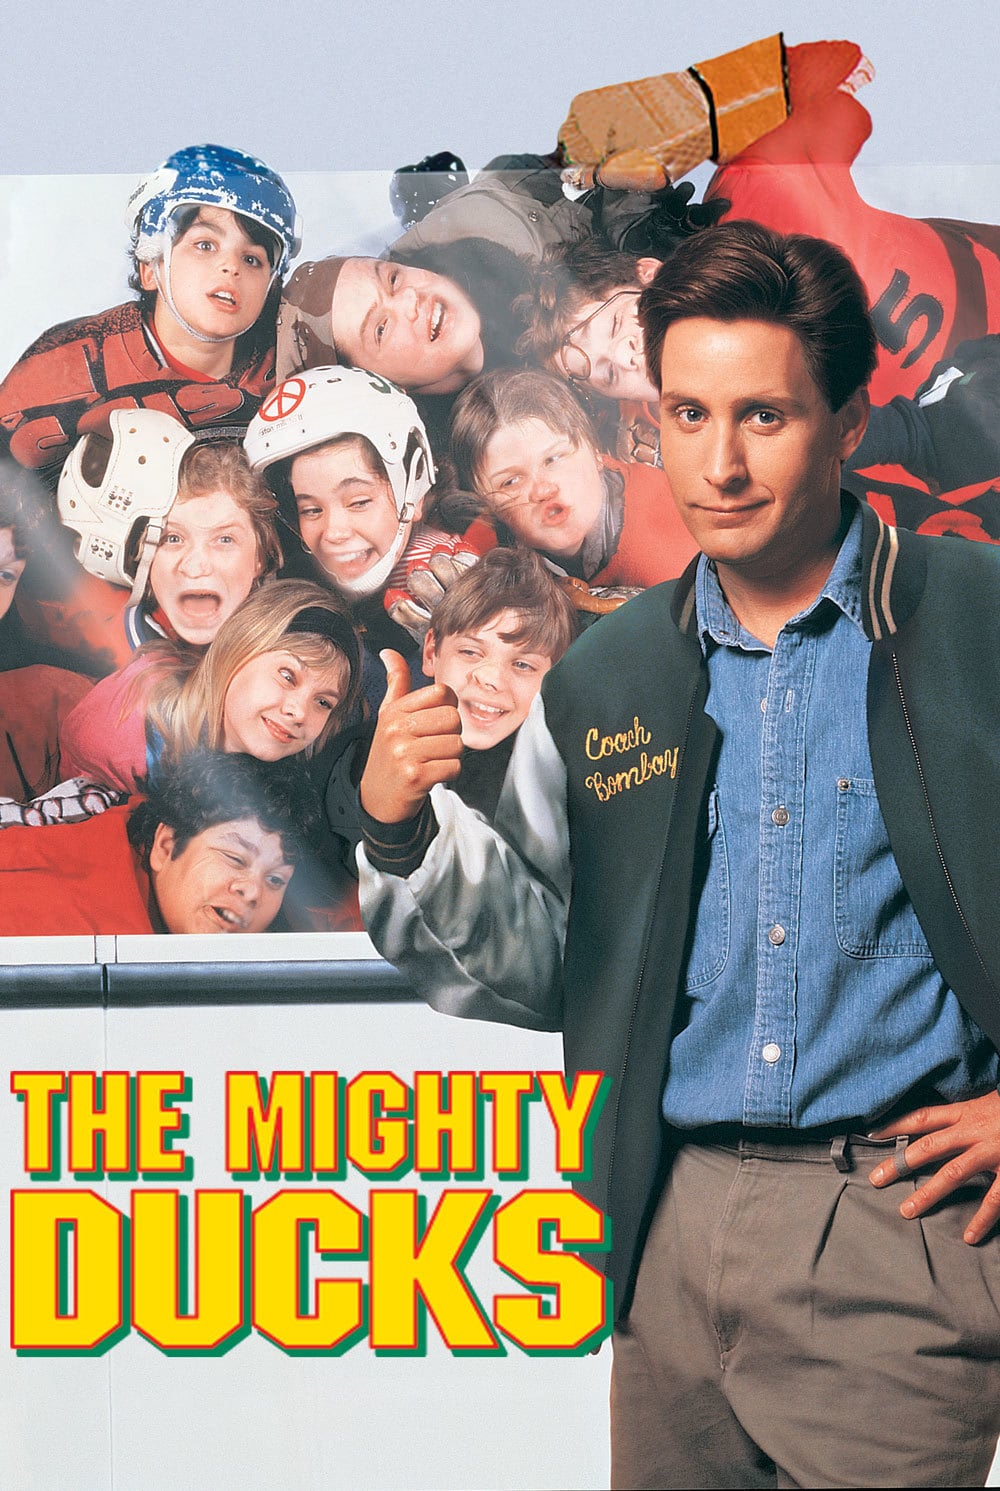 The Mighty Ducks| Movies About & Relating To Sports | SPMA Shelf